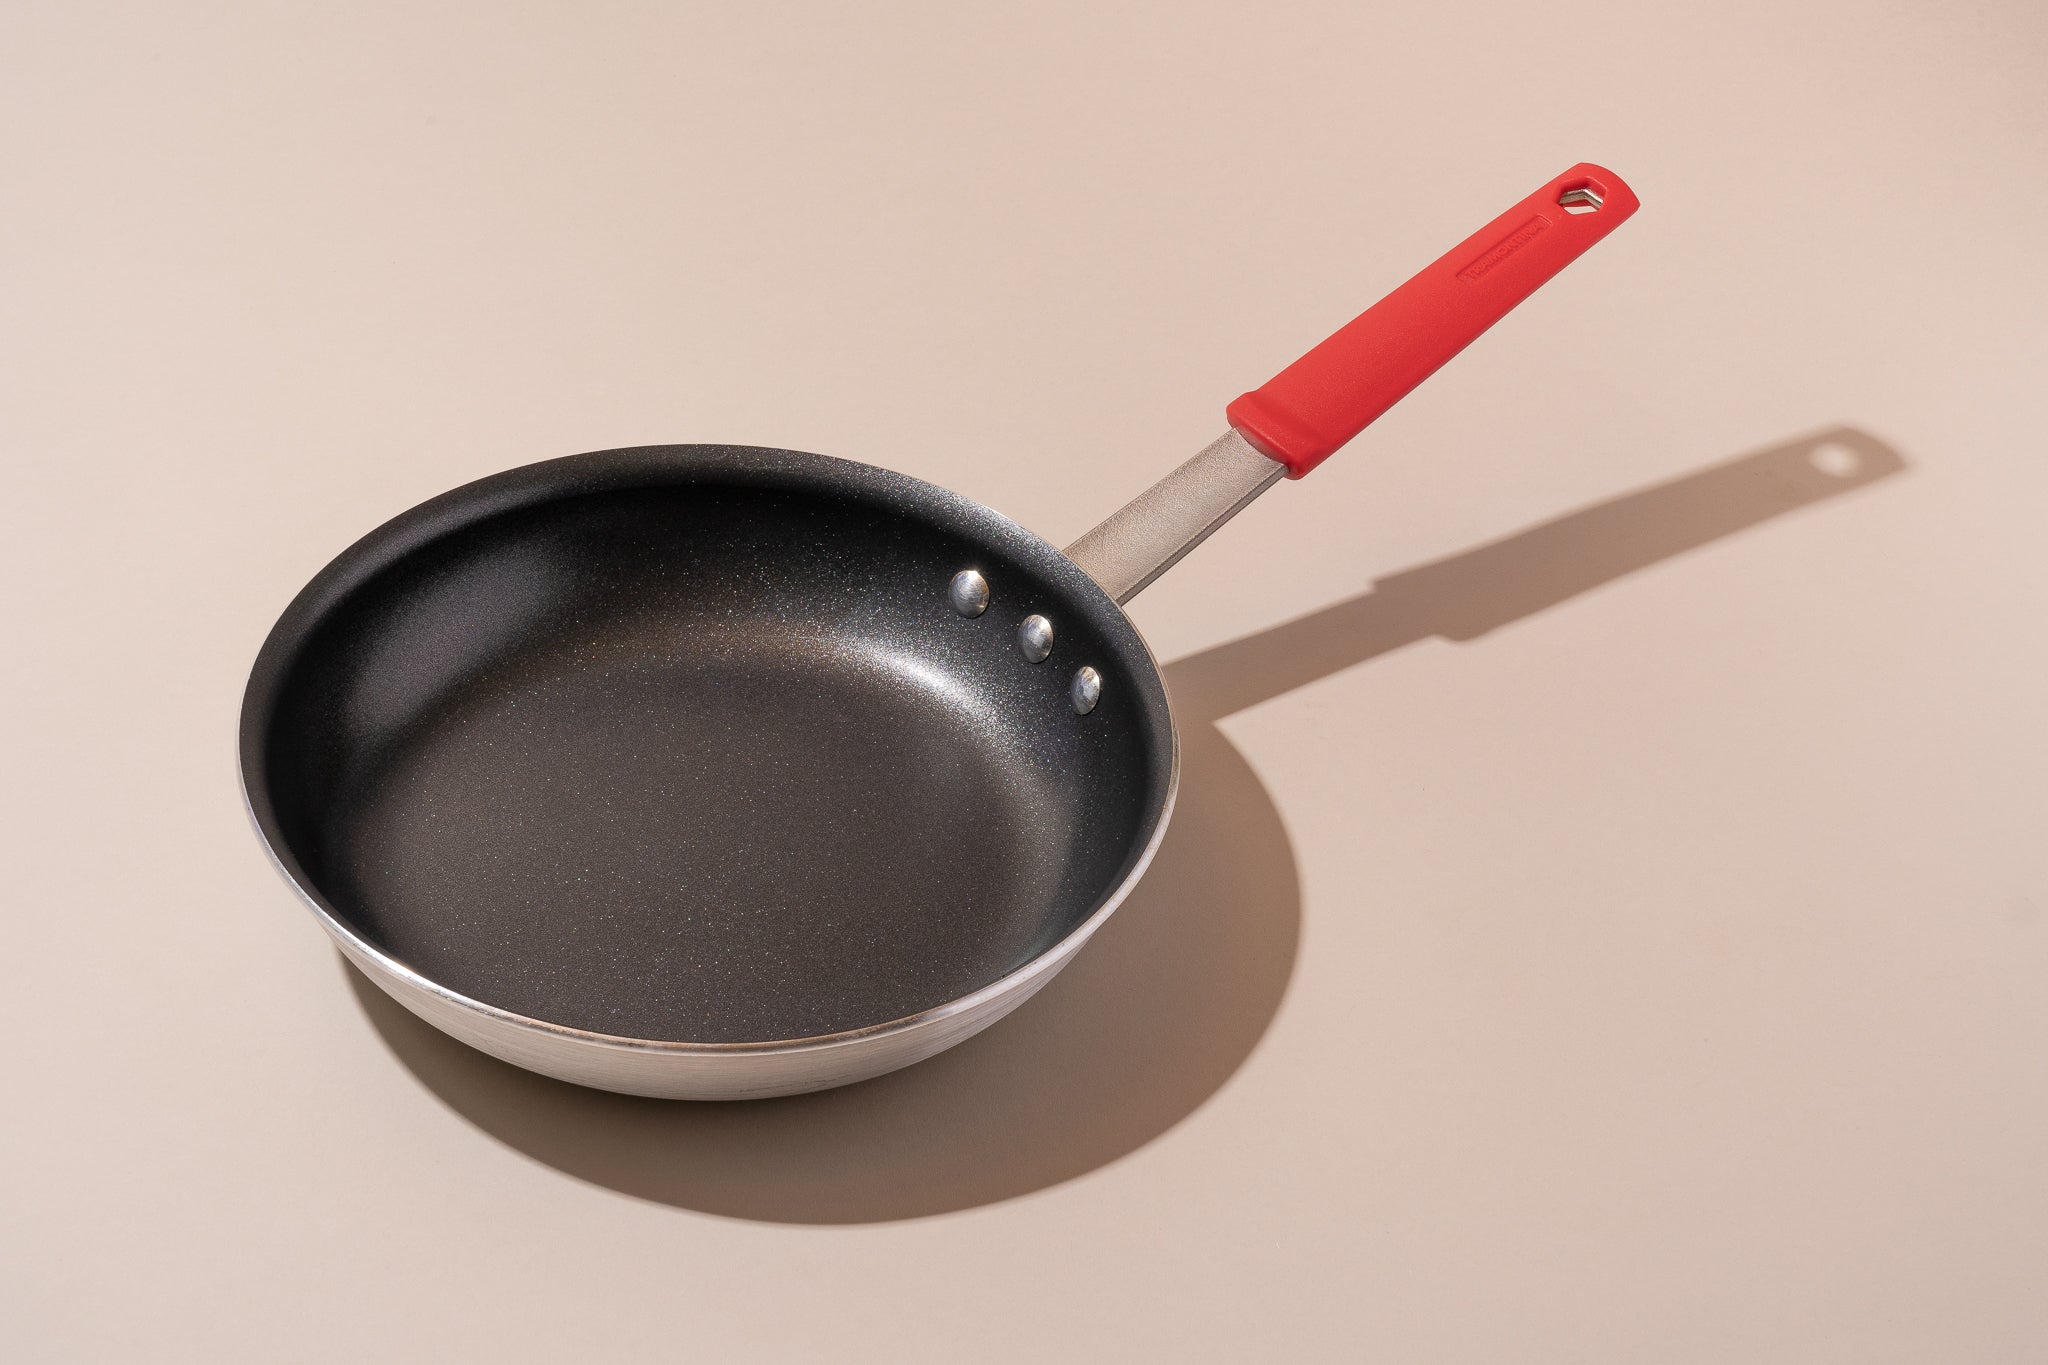 Frying Pan Review: The Best Cookware for Your Kitchen